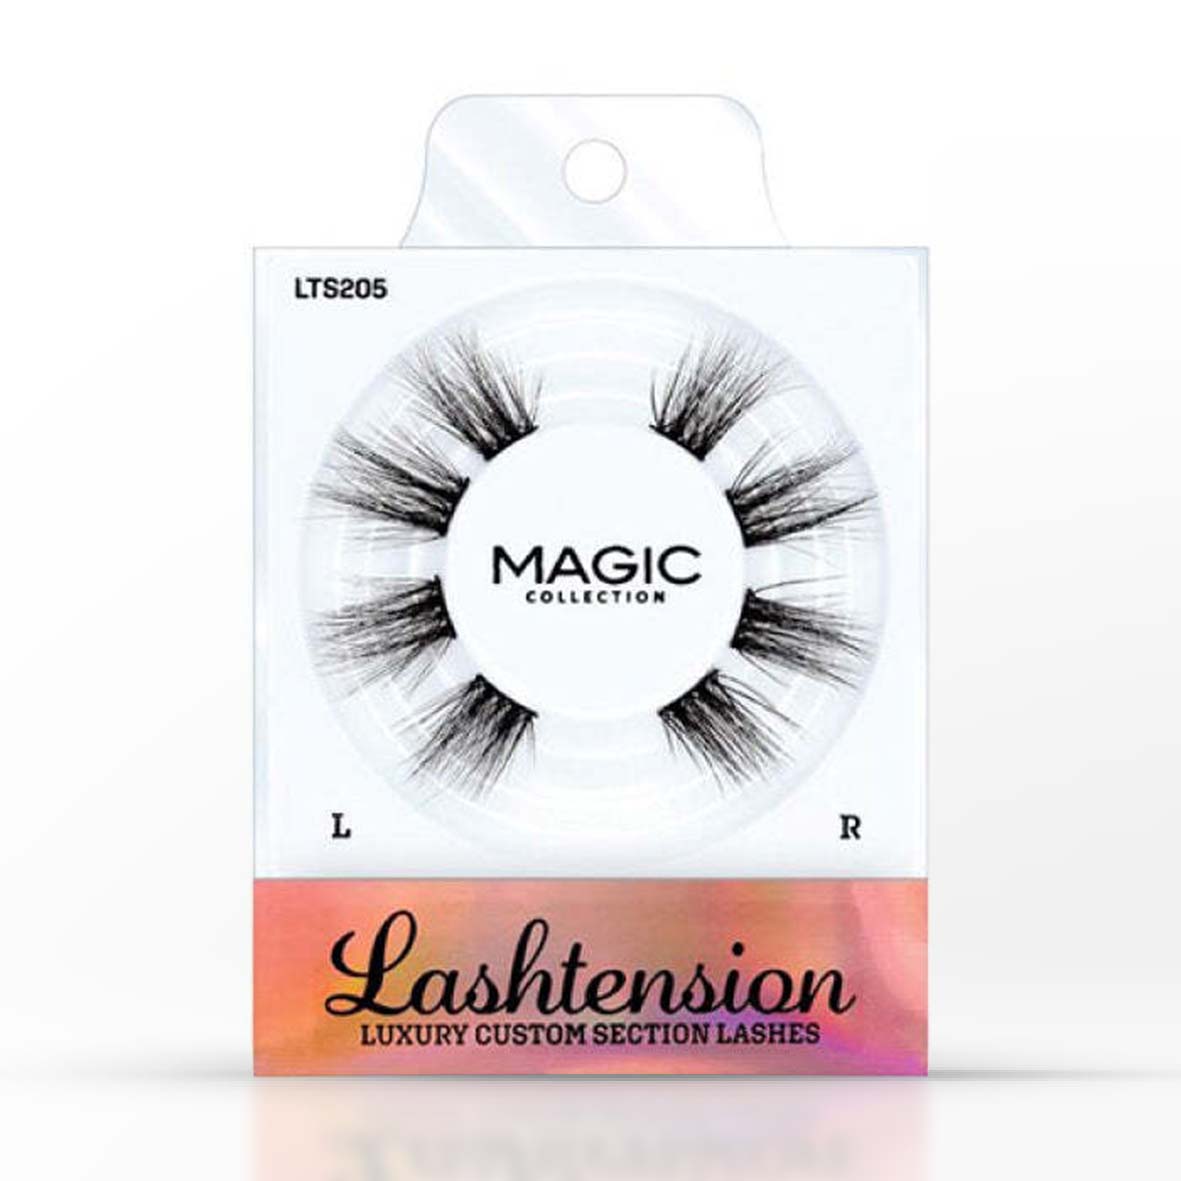 MAGIC COLLECTION LASHTENSION LUXRUY CUSTOM SECTION LASHES (LTS205)